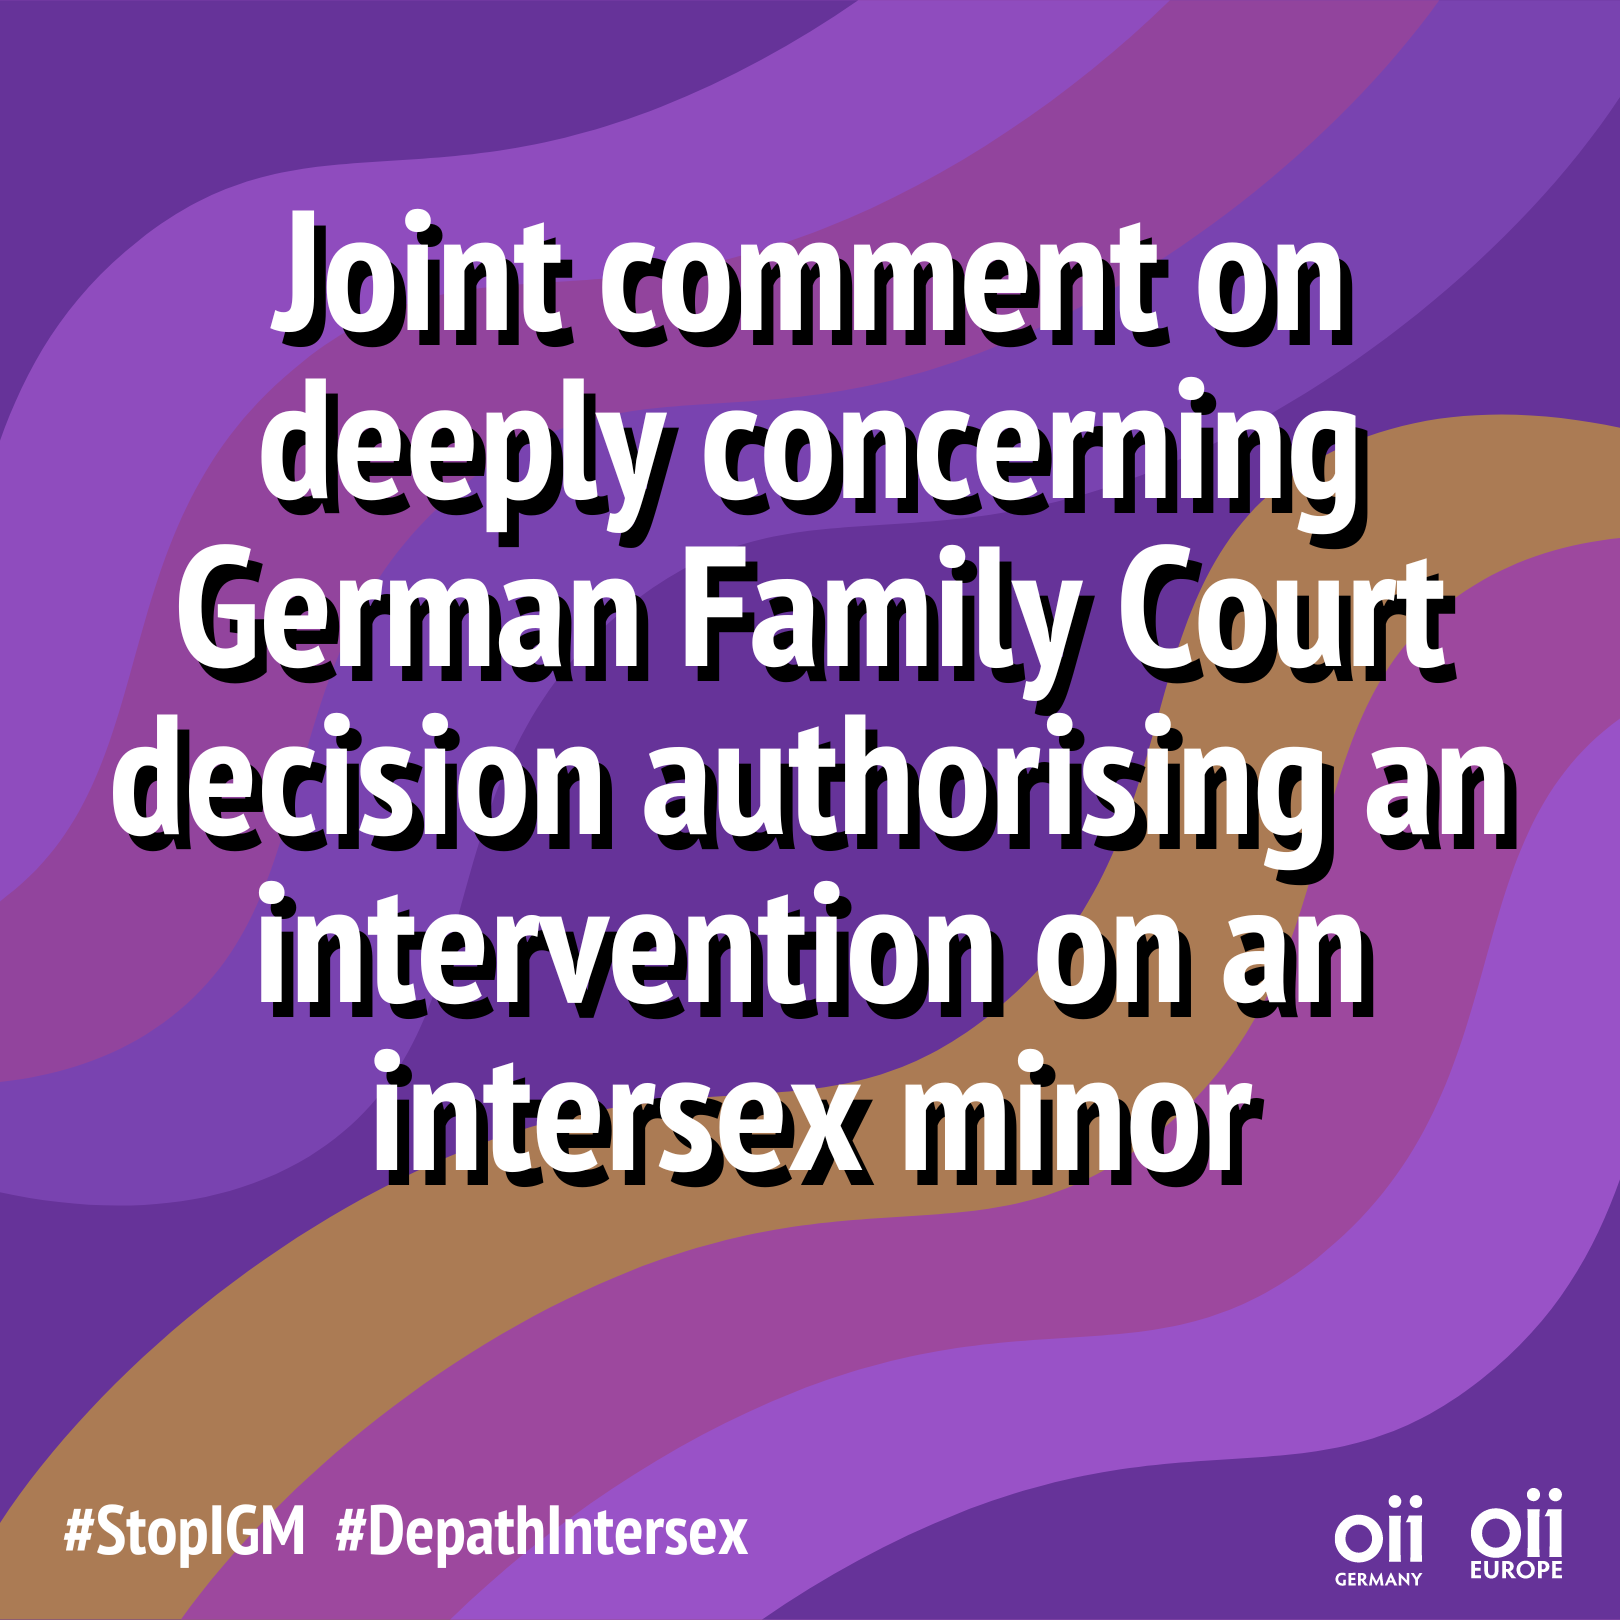 OII Germany & OII Europe comment on deeply concerning German Family Court decision authorising an intervention on an intersex minor